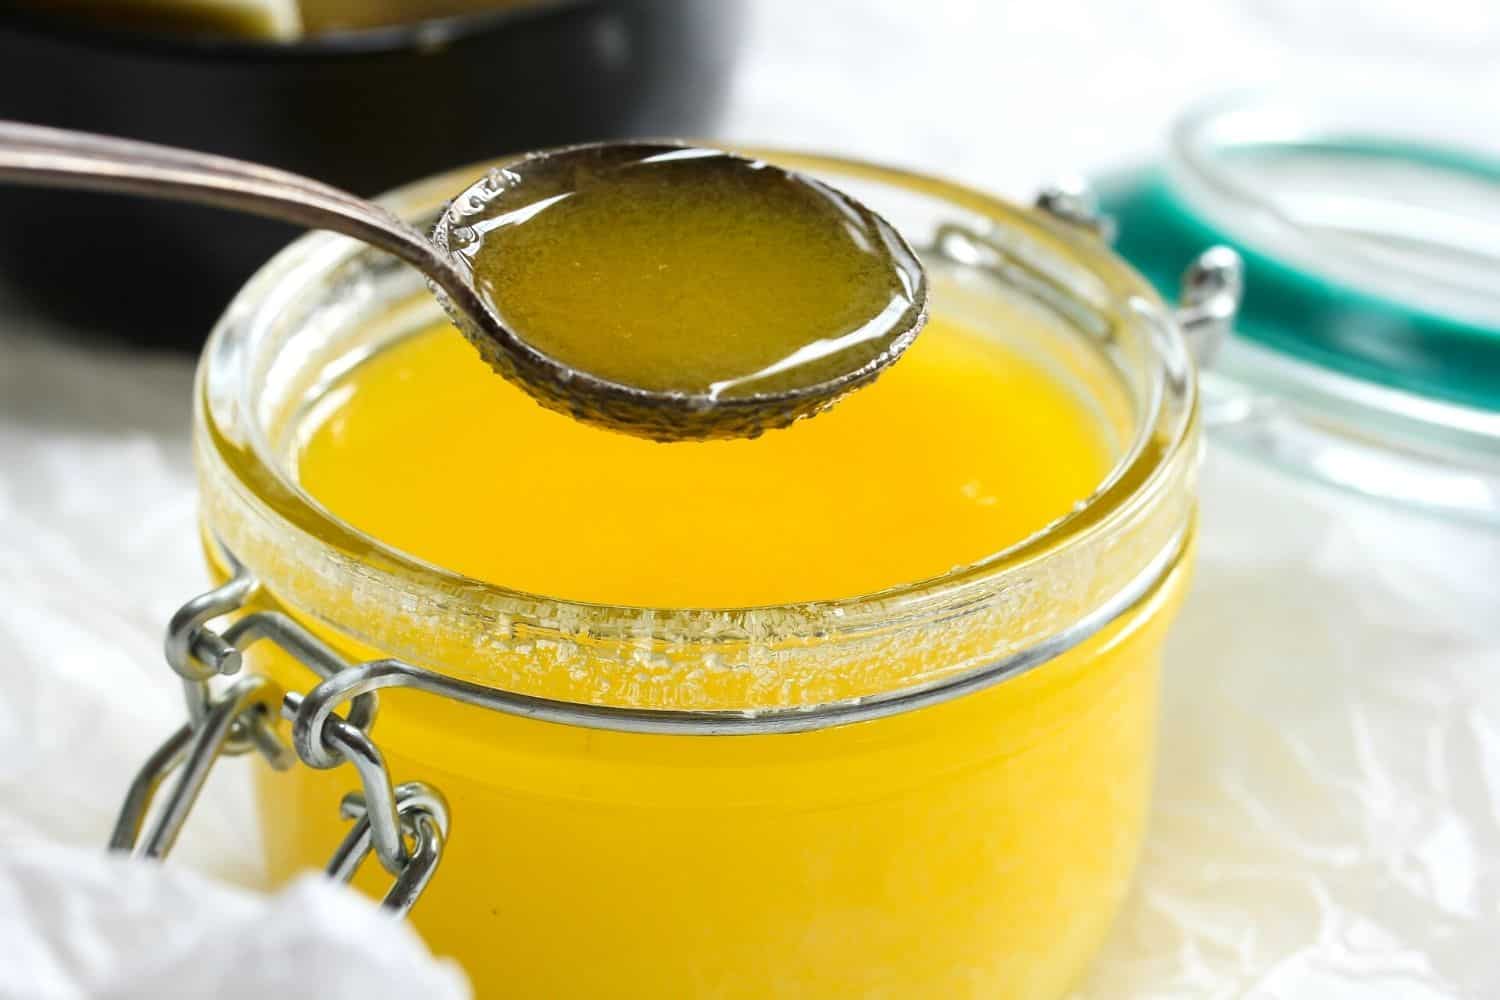 How to make Clarified Butter and what does it mean to clarify butter when cooking